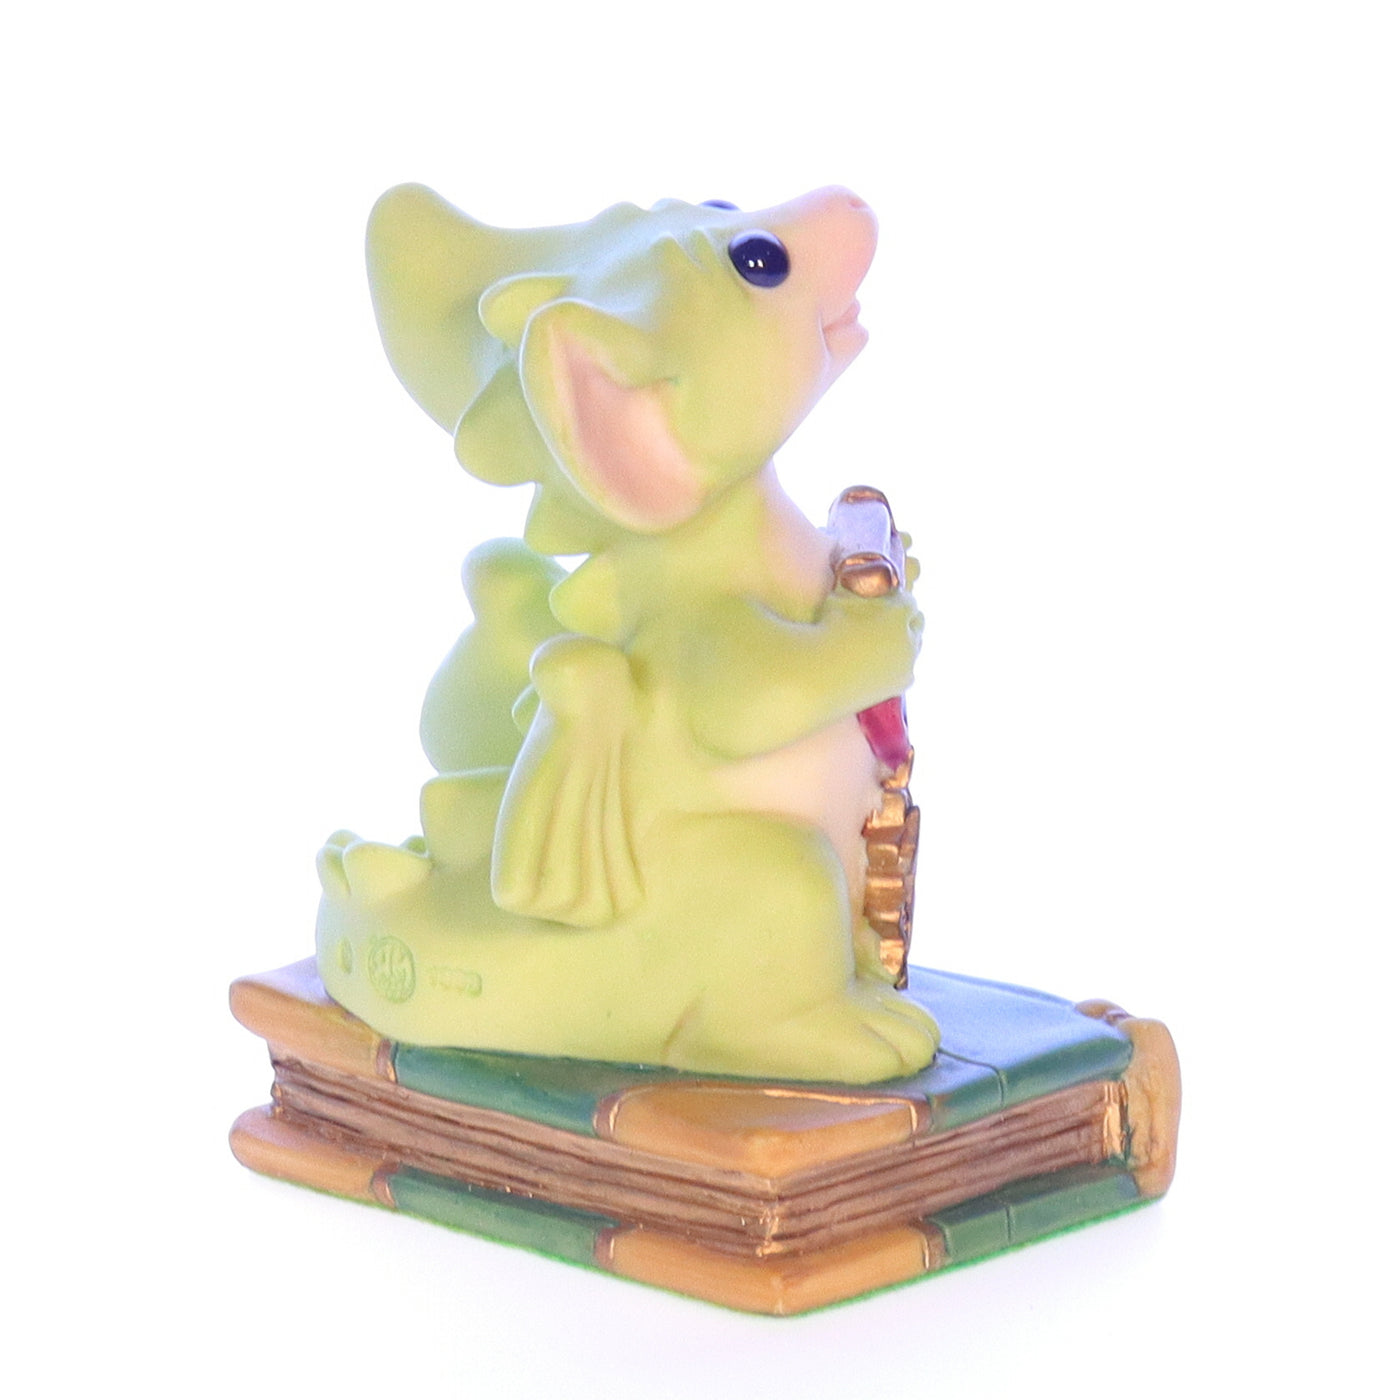 Whimsical_World_of_Pocket_Dragons_053839028875_The_Winner_Fantasy_Figurine_1998_Box Right View